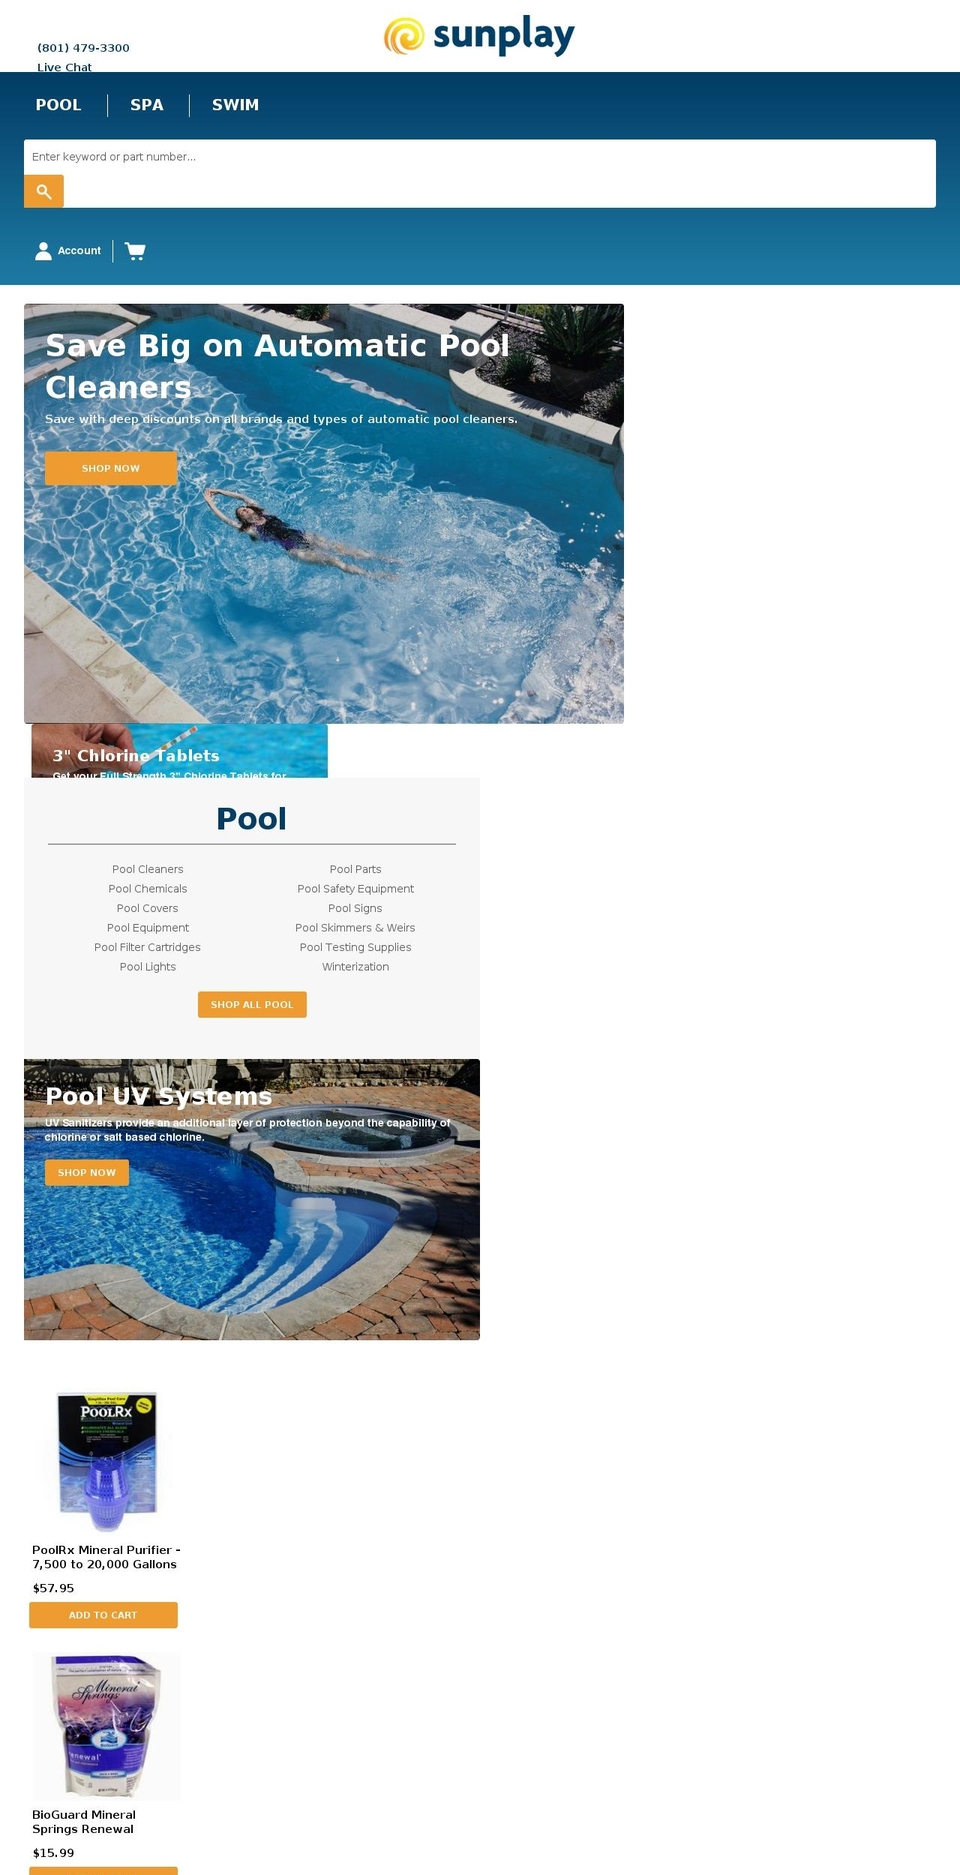 Sunplay v1.0 [Speck - Collection] Shopify theme site example sunplay.academy